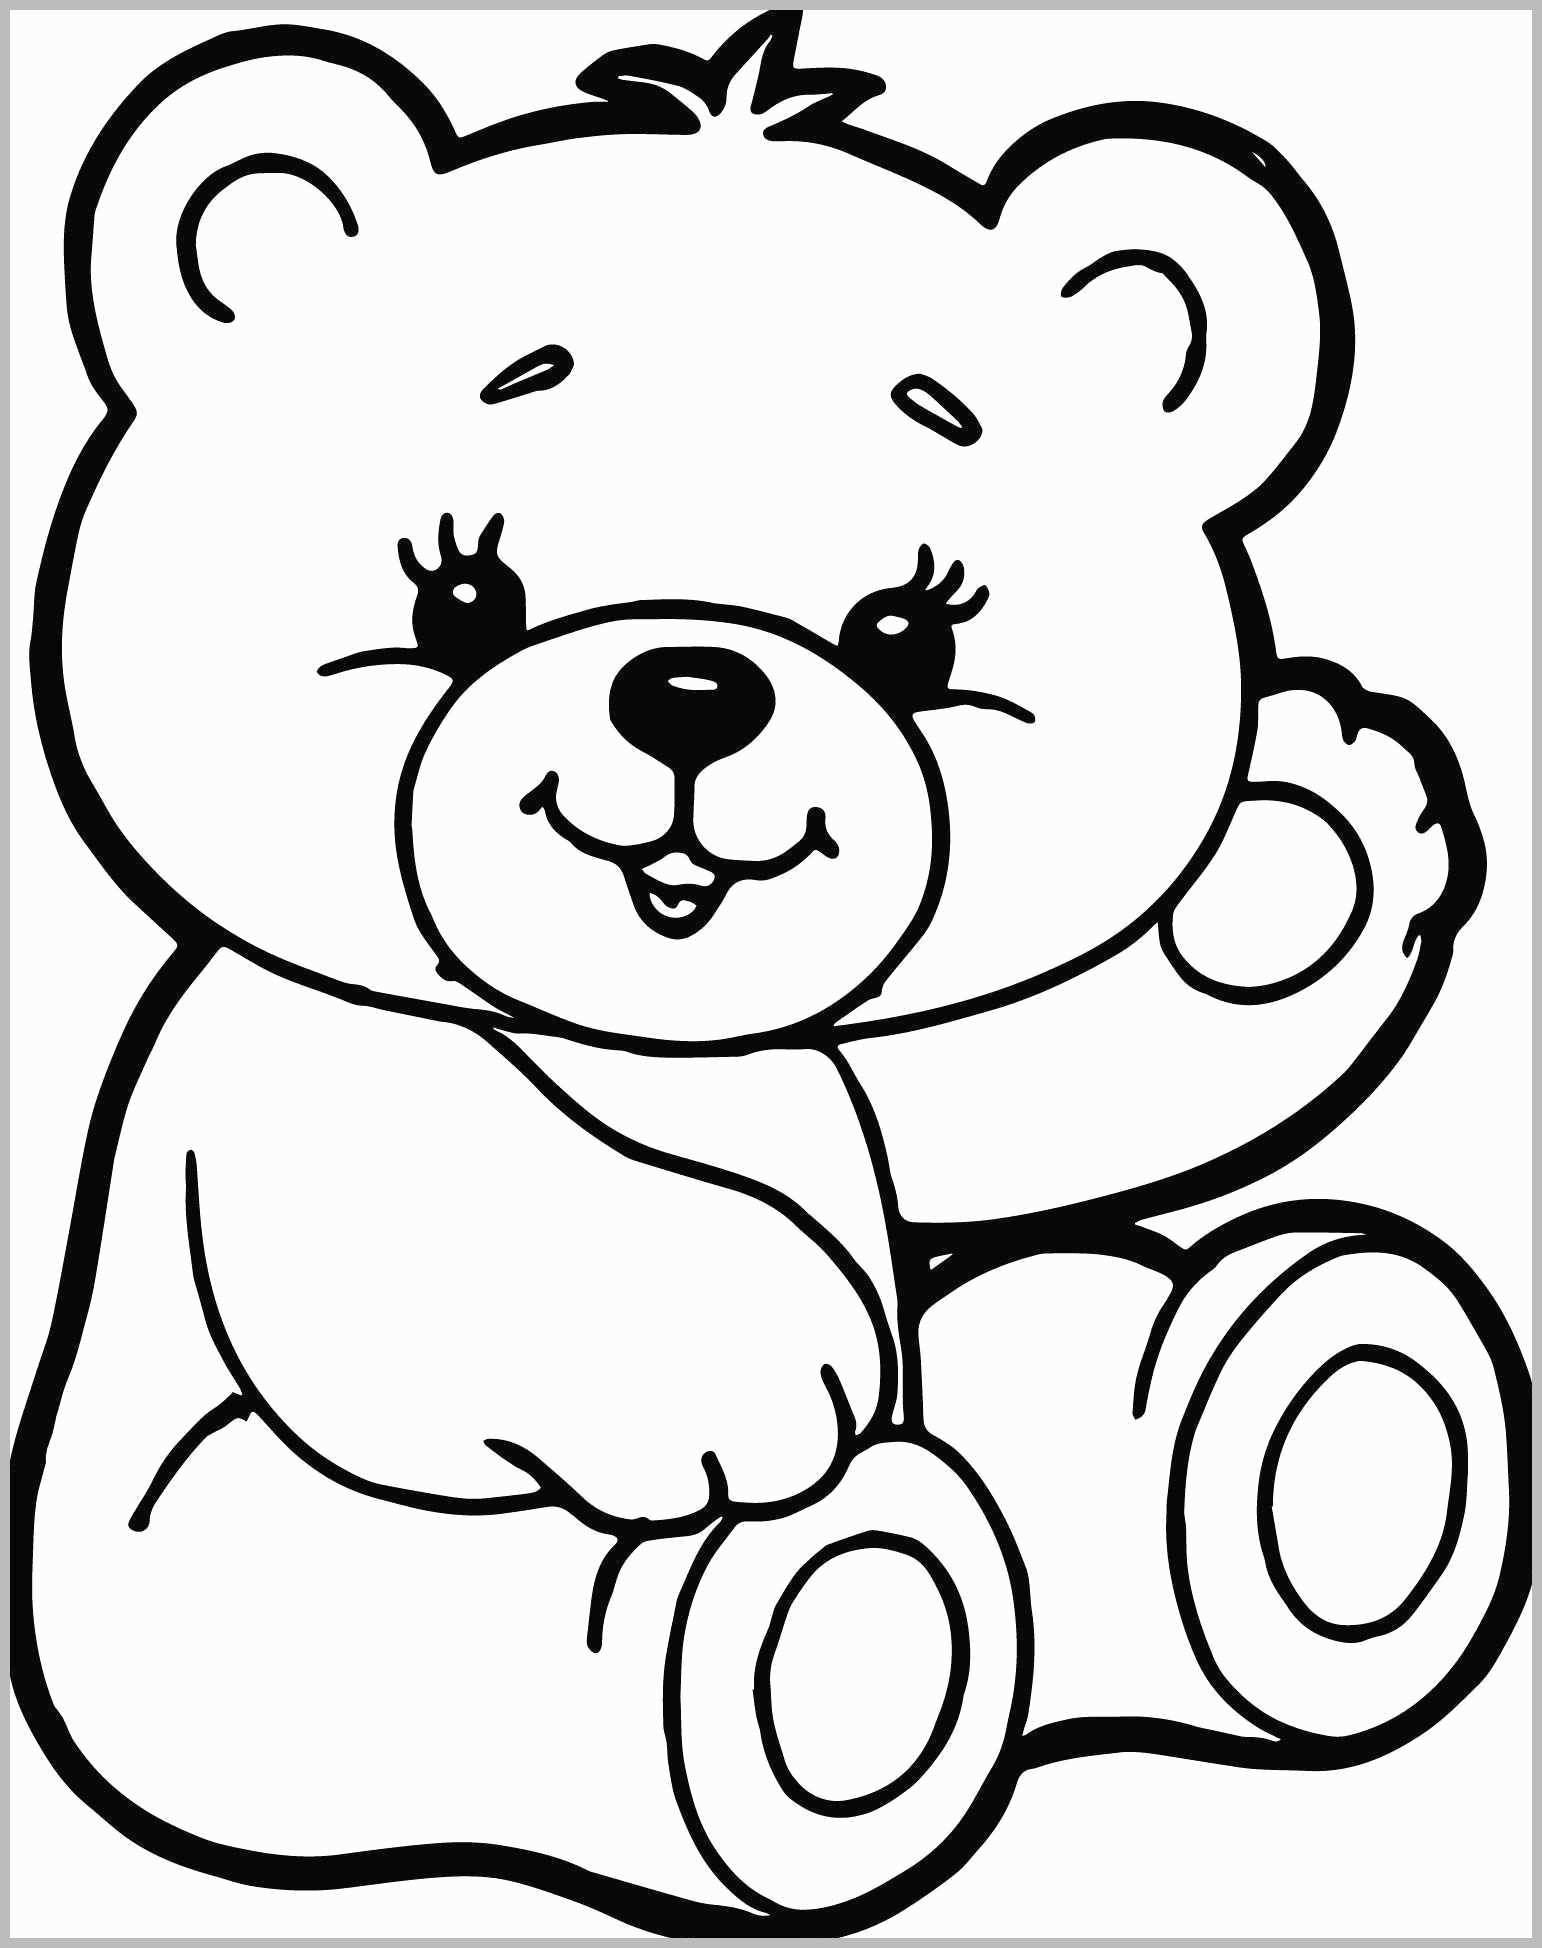 Valentine Teddy Bear Coloring Pages Coloring Teddy Bear Coloring Pages To Print Sheet Elsa Free For